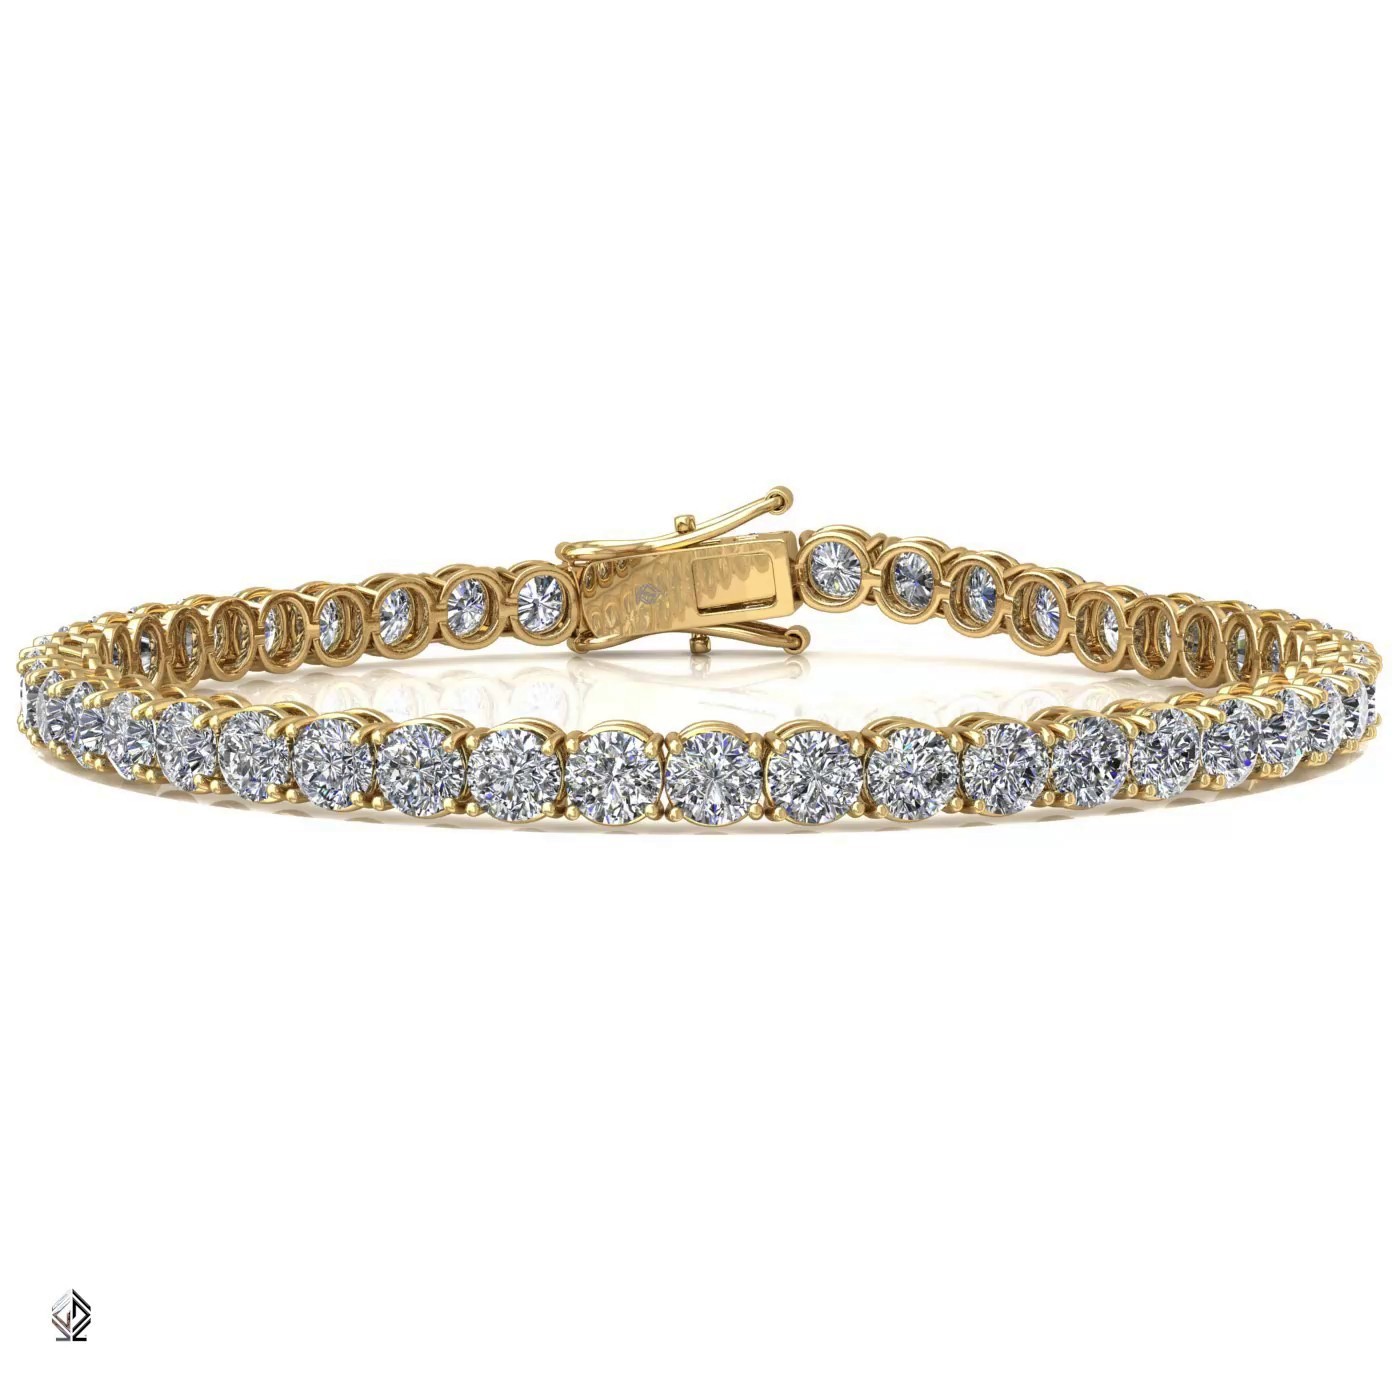 18k yellow gold 2.4mm 4 prong round shape diamond tennis bracelet in round setting Photos & images